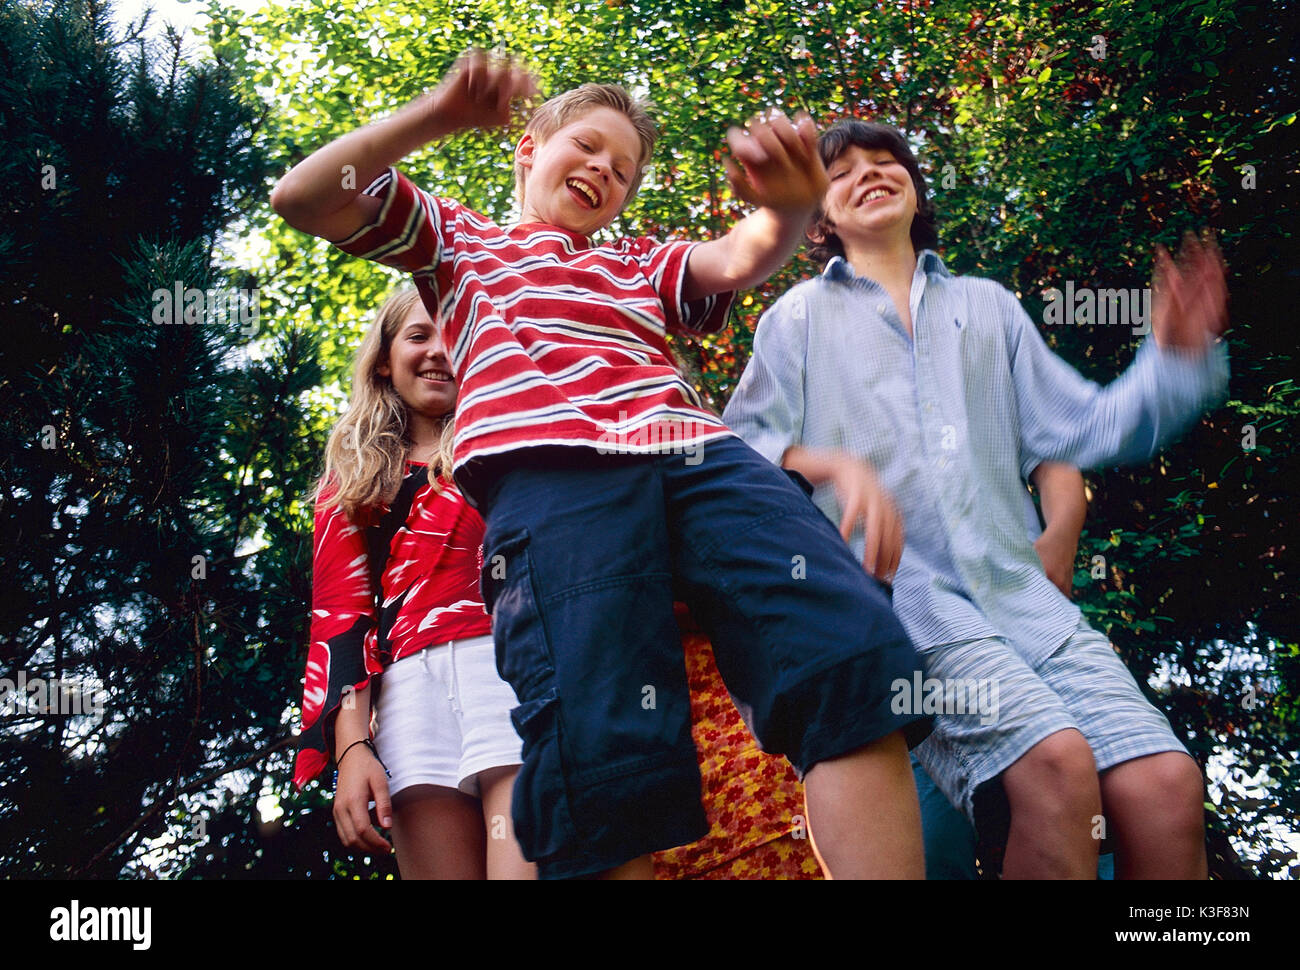 Group of laughing children / of young persons from the below shot Stock Photo